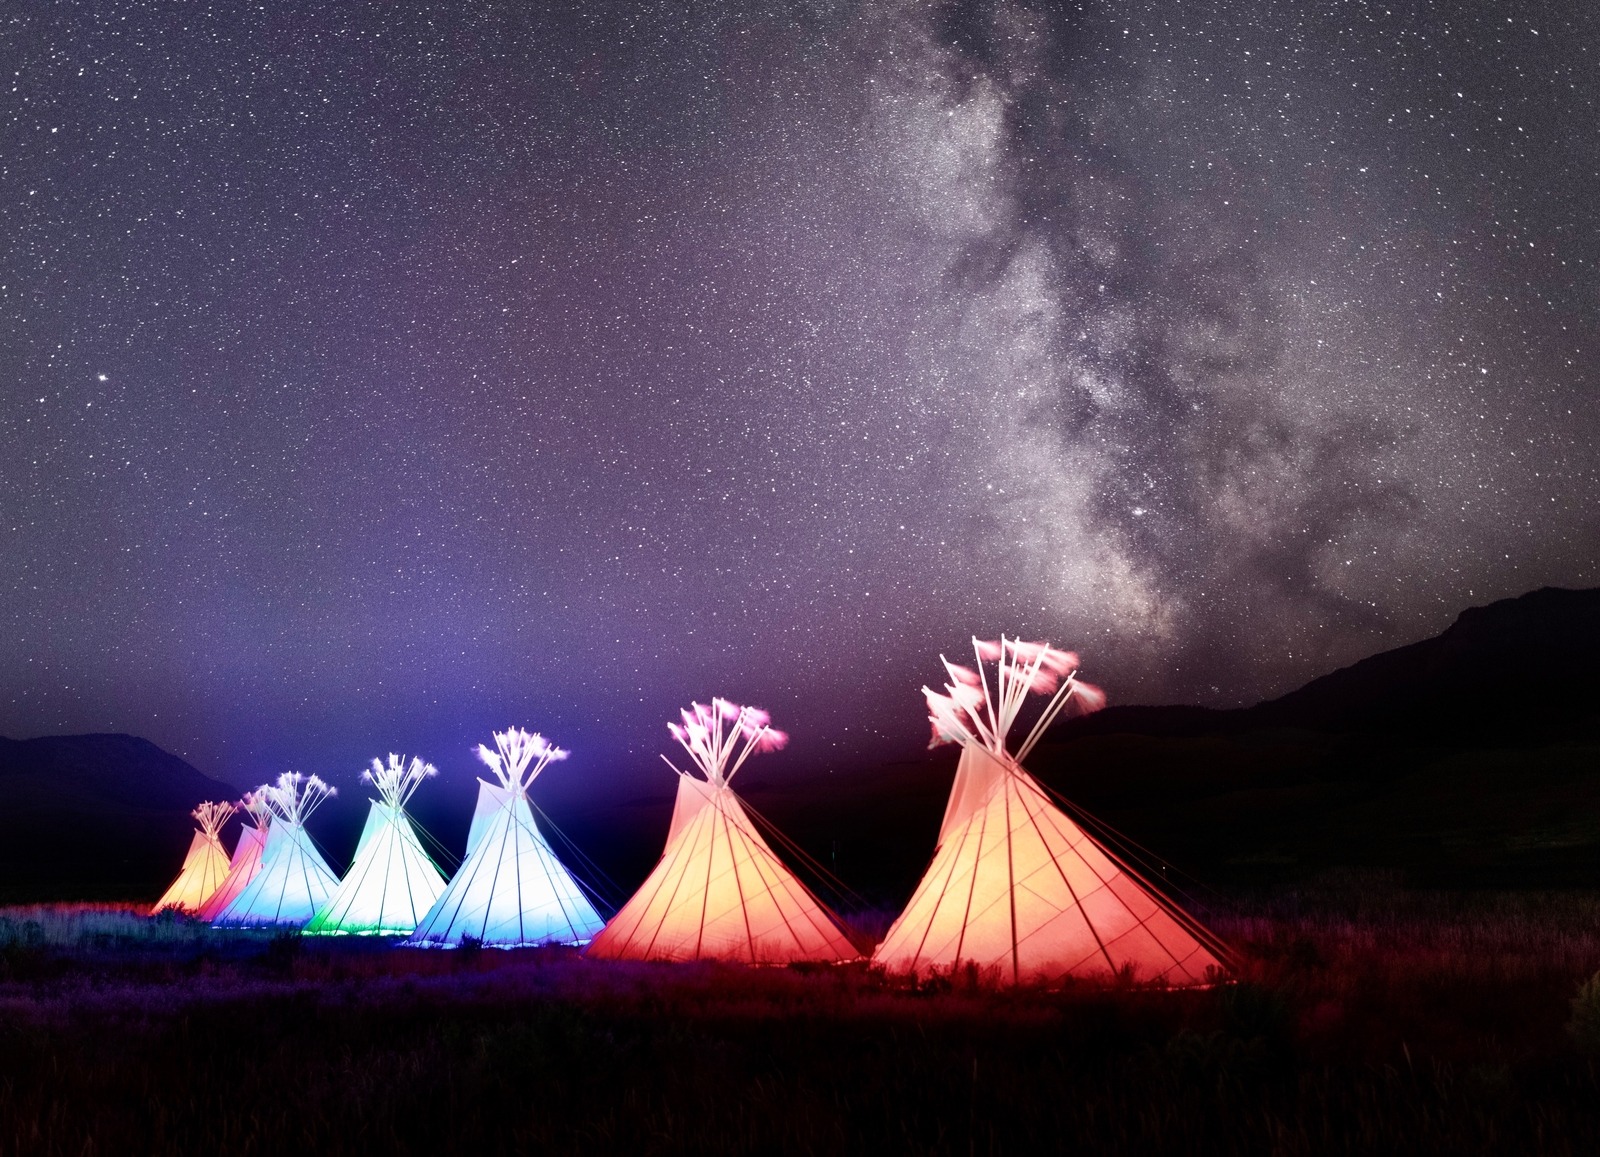 Glowing teepees return to the front doorstep of Yellowstone at Roosevelt Arch on the edge of Gardiner, Montana. They're a reminder of how the lands that became Yellowstone have their own history with different tribes across time and space. Photo courtesy Jacob W. Frank/NPS